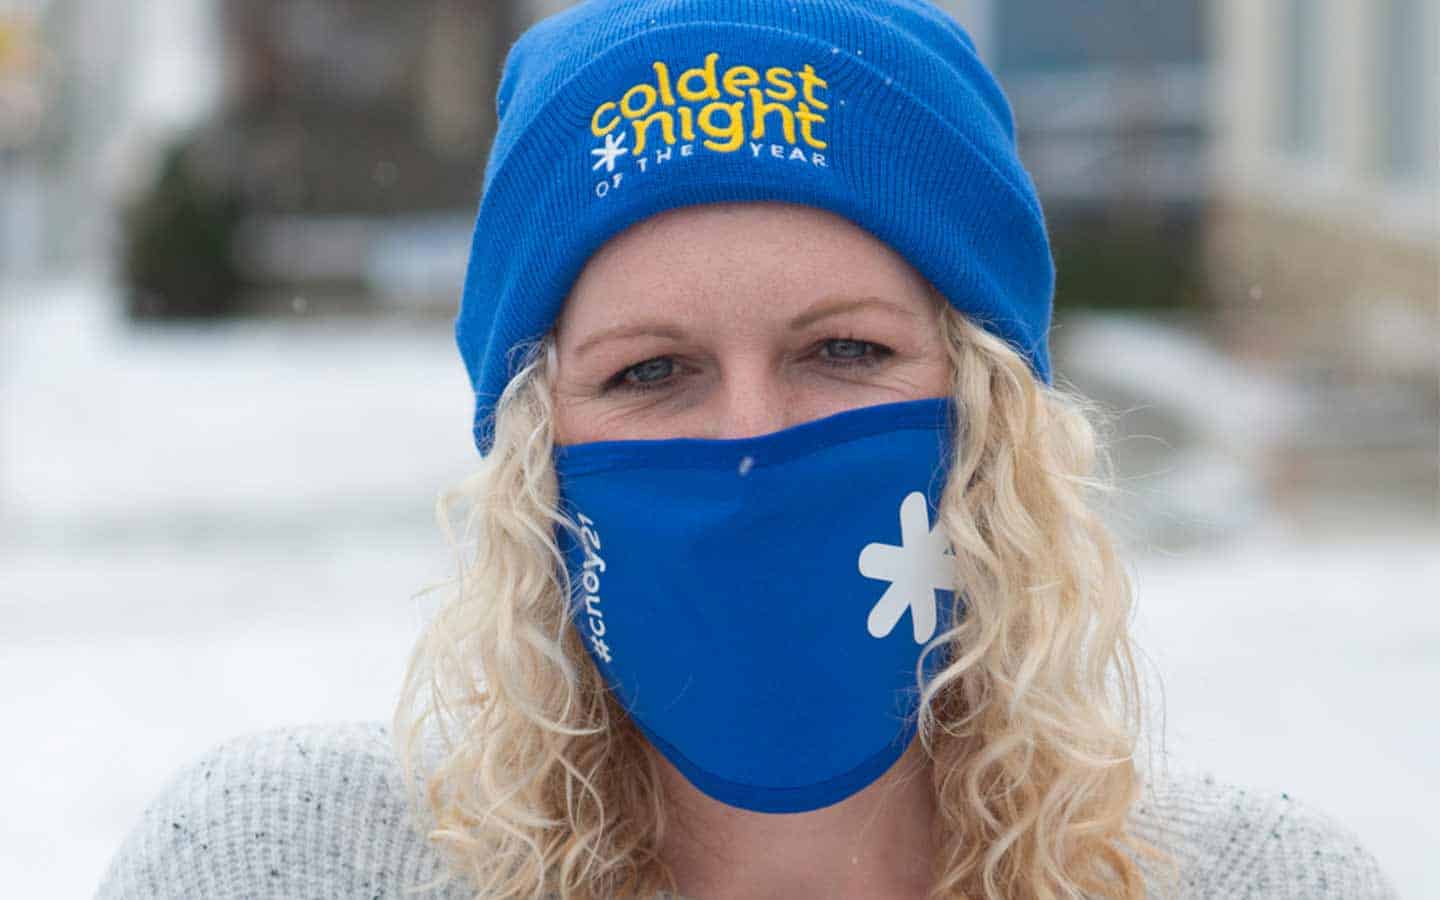 WCS sees strong support for Coldest Night